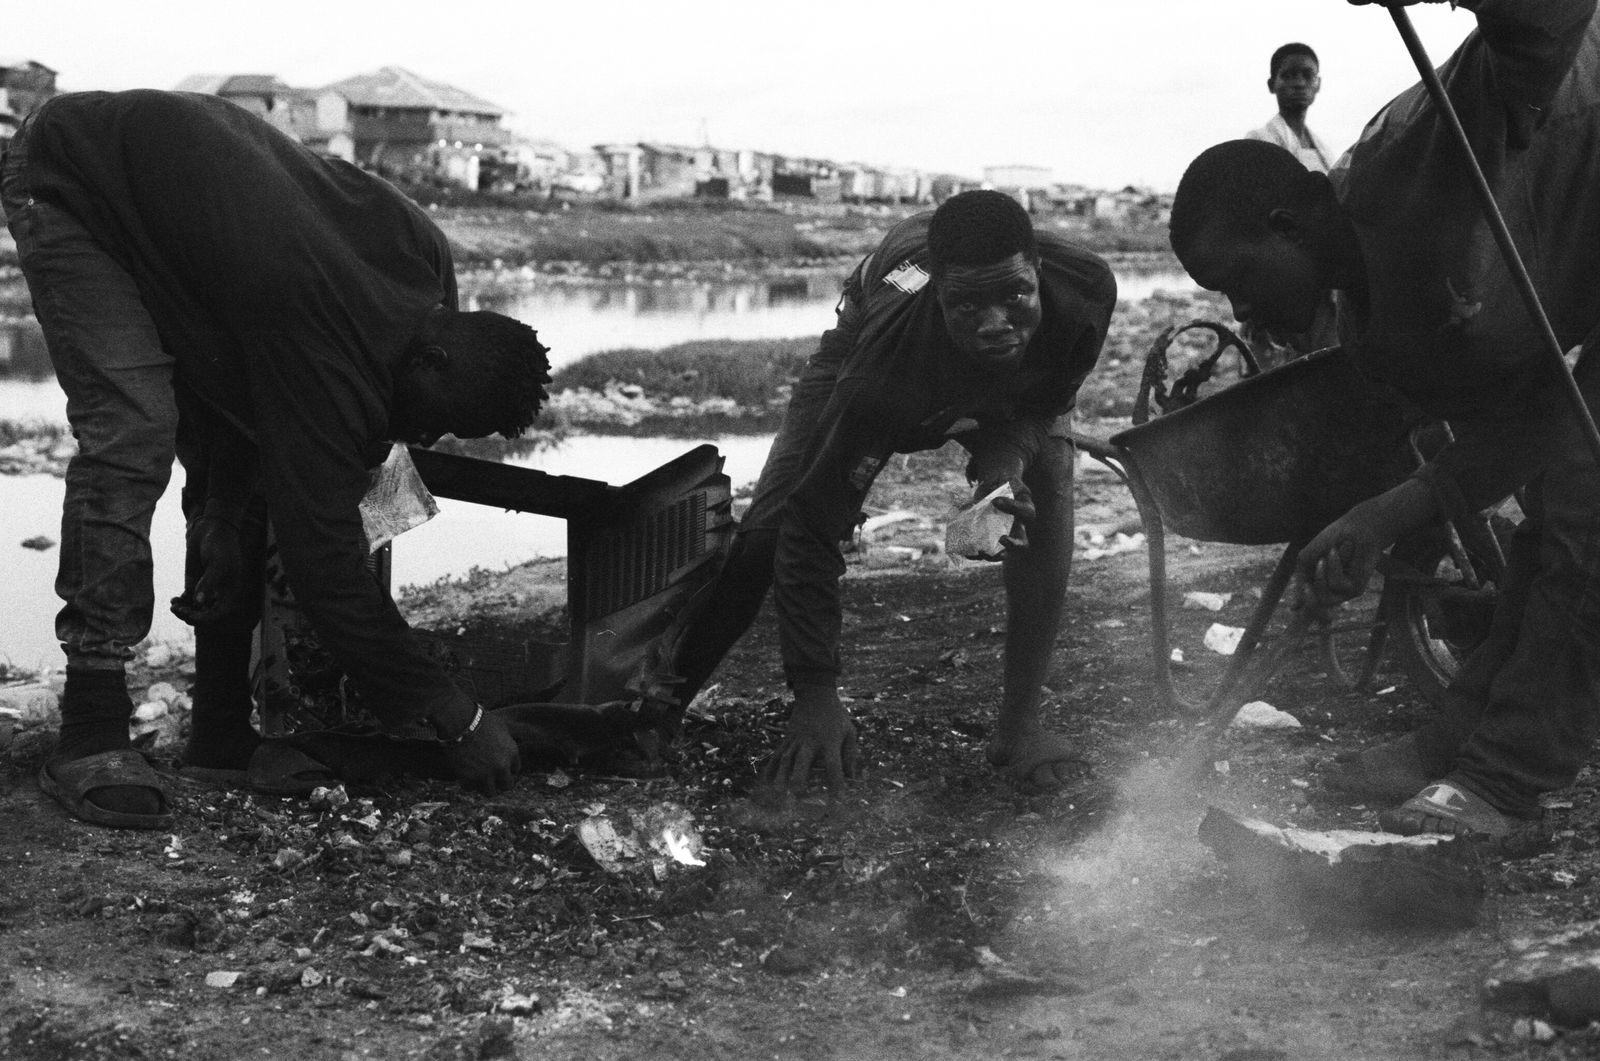 © carolina rapezzi - Accra, Agbogbloshie. A group of workers in the "Kilimanjaro" area picking up metal scraps from the ground.